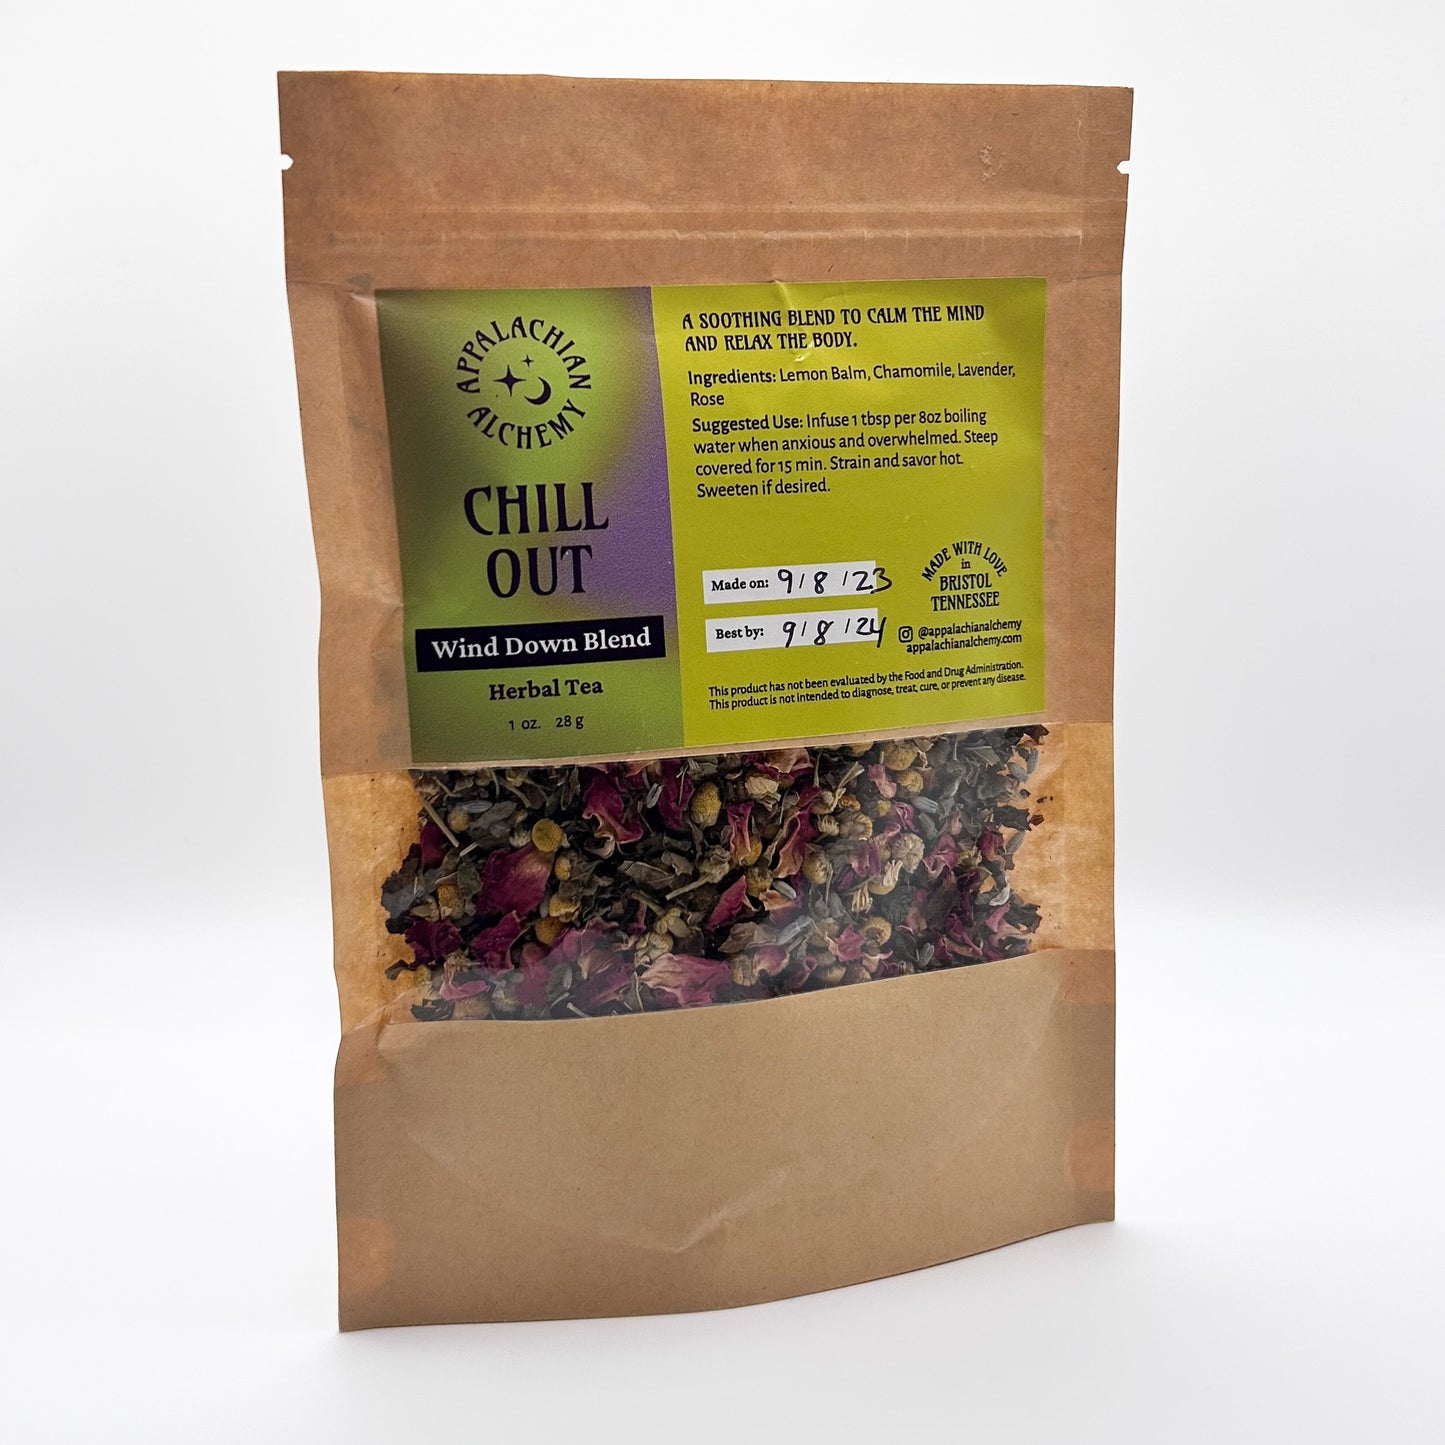 Chill Out Herbal Tea